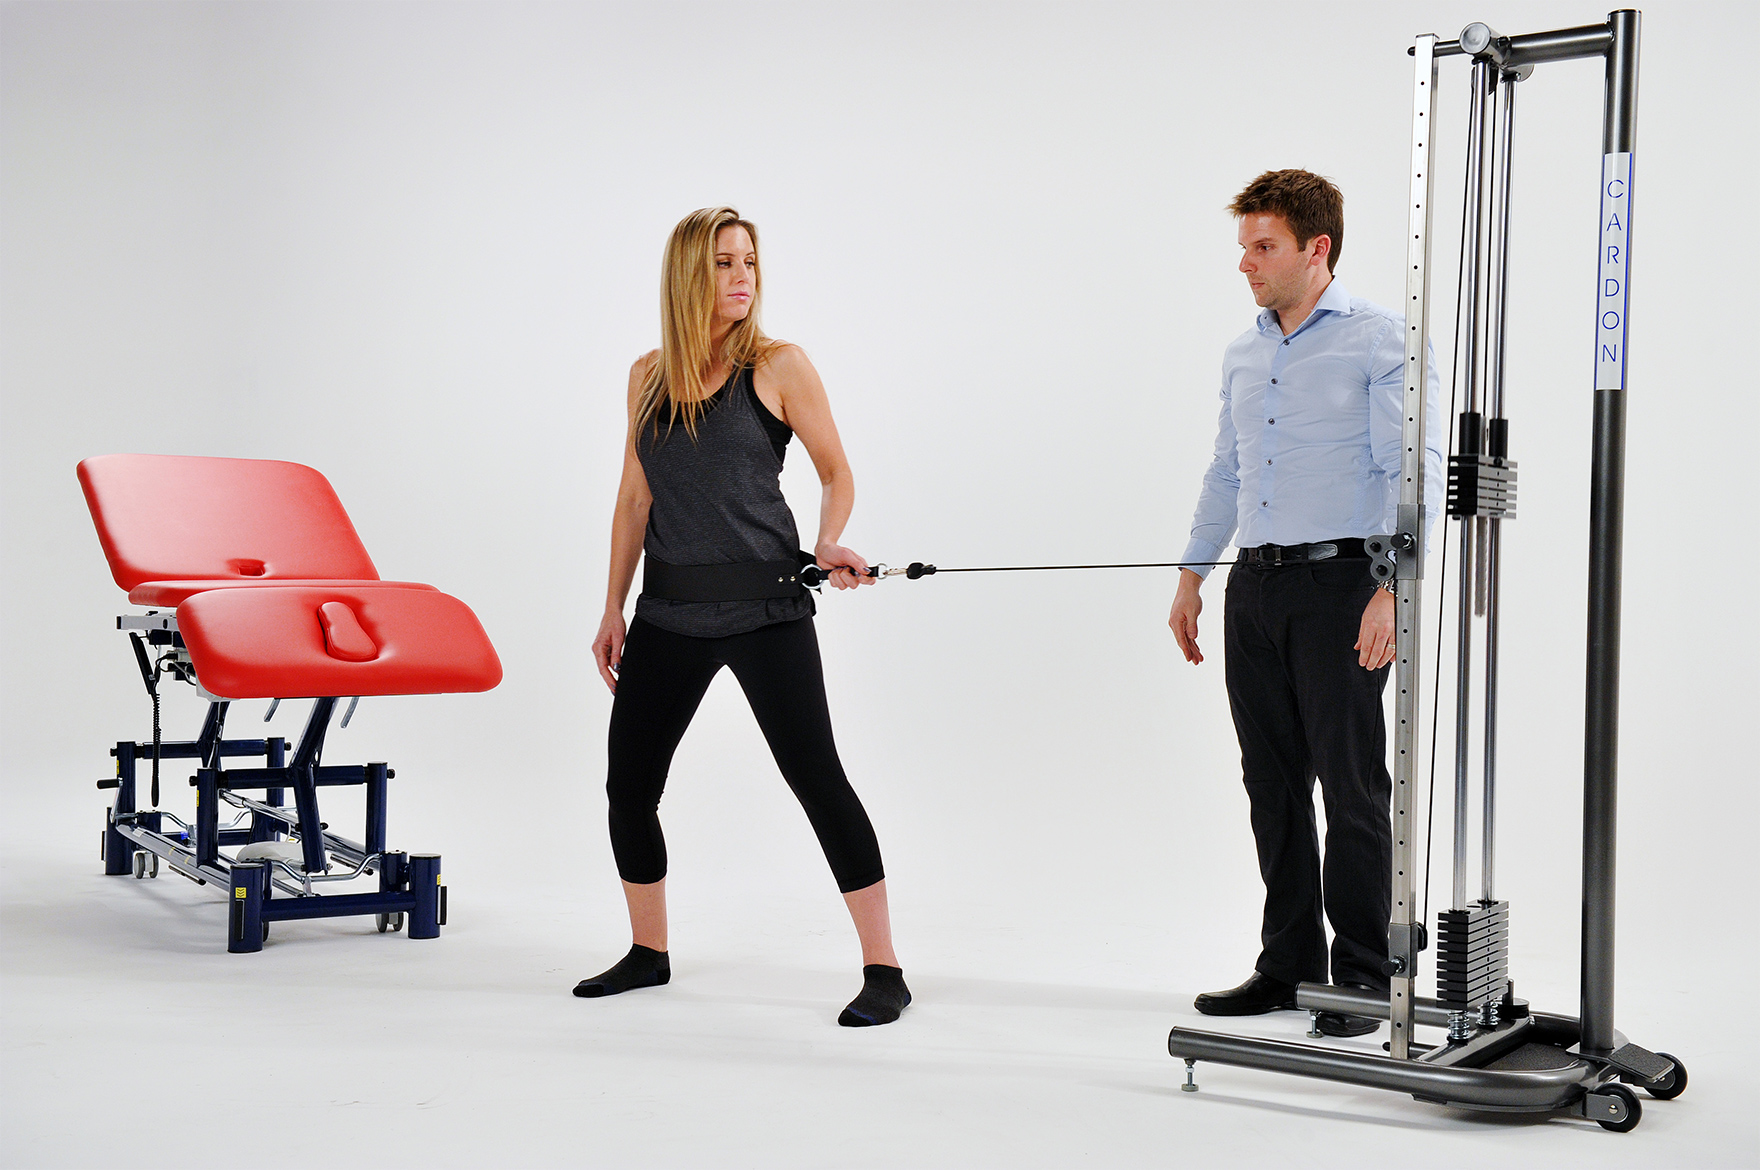 Mobile Pulley, Therapeutic Exercise Equipment